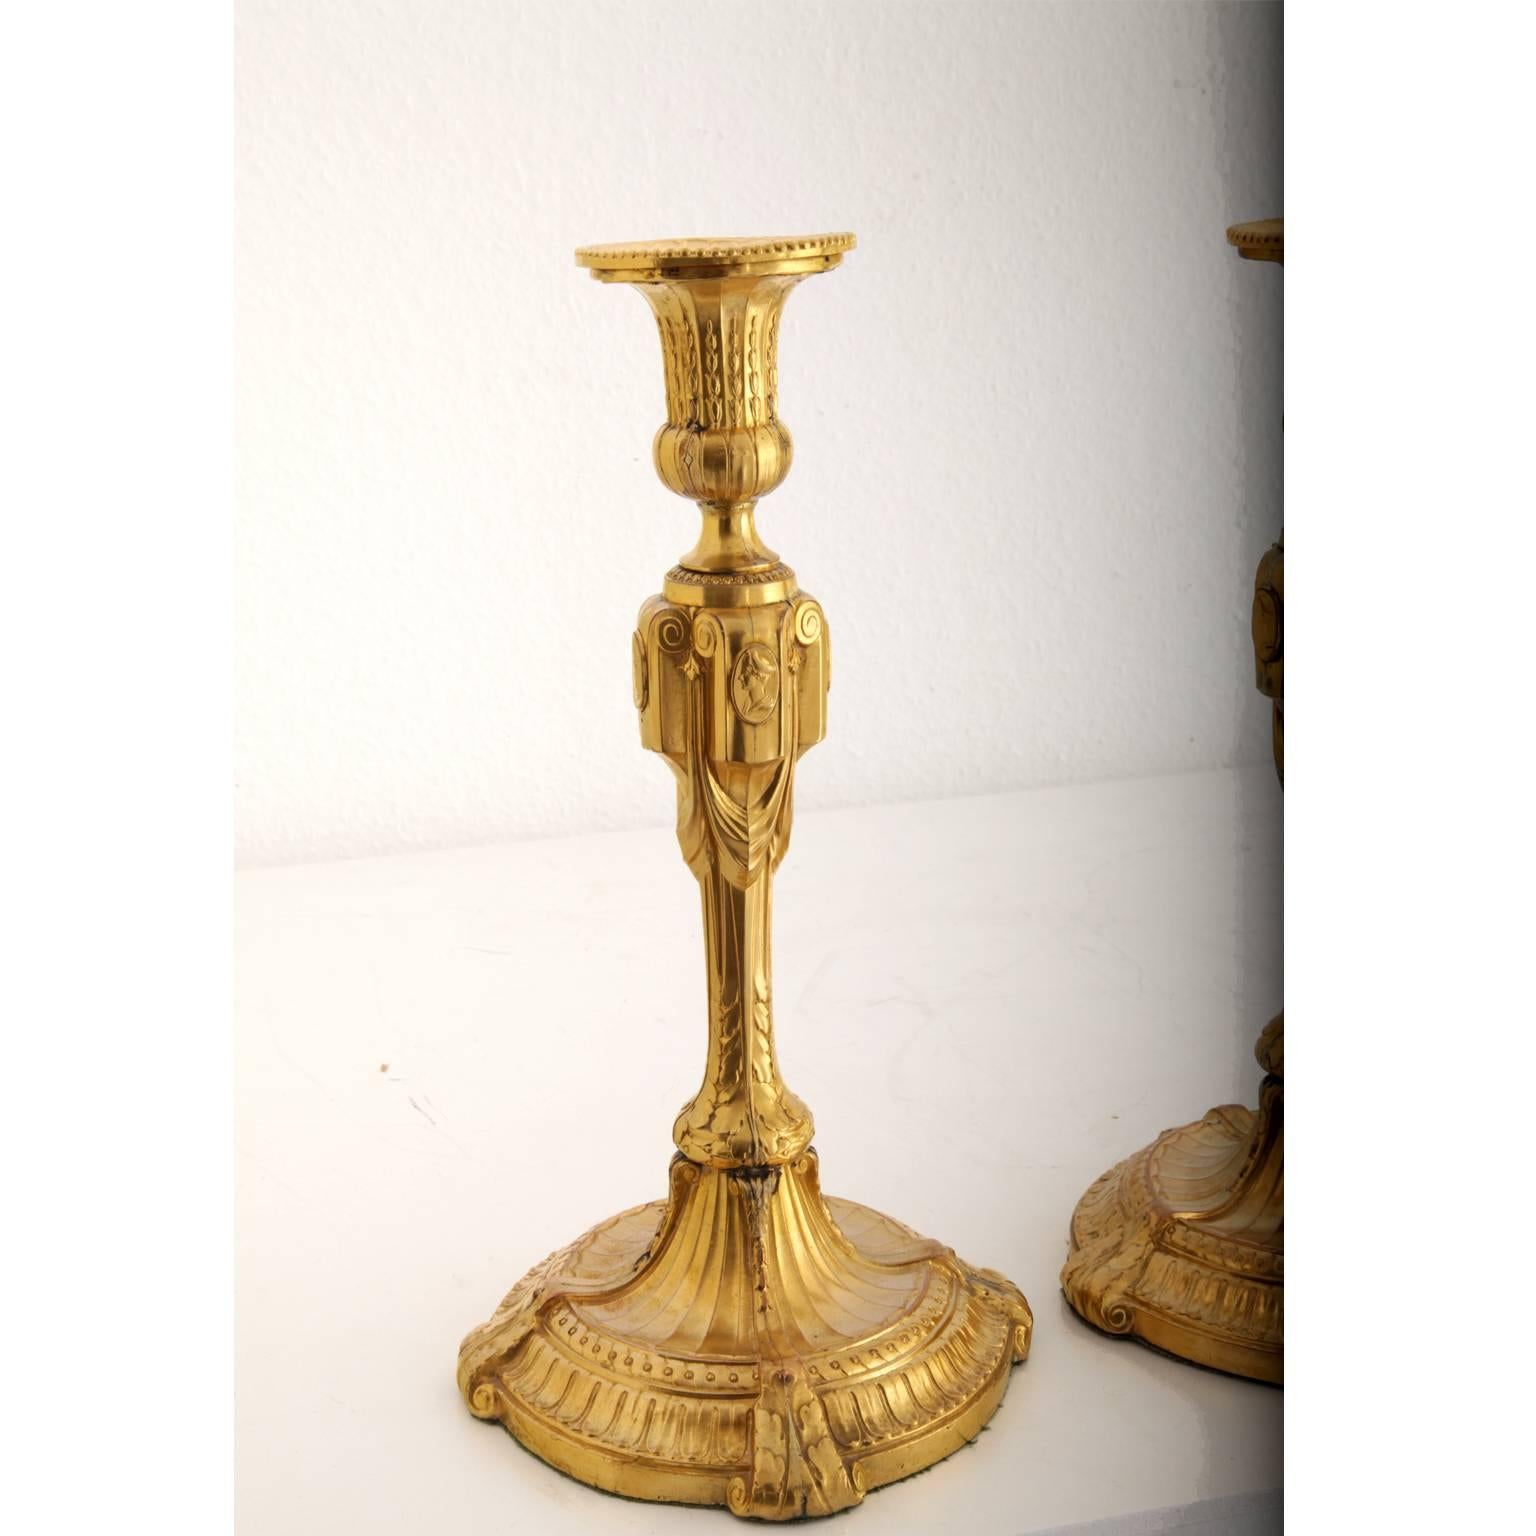 Early 19th Century Neoclassical Candlesticks, circa 1800